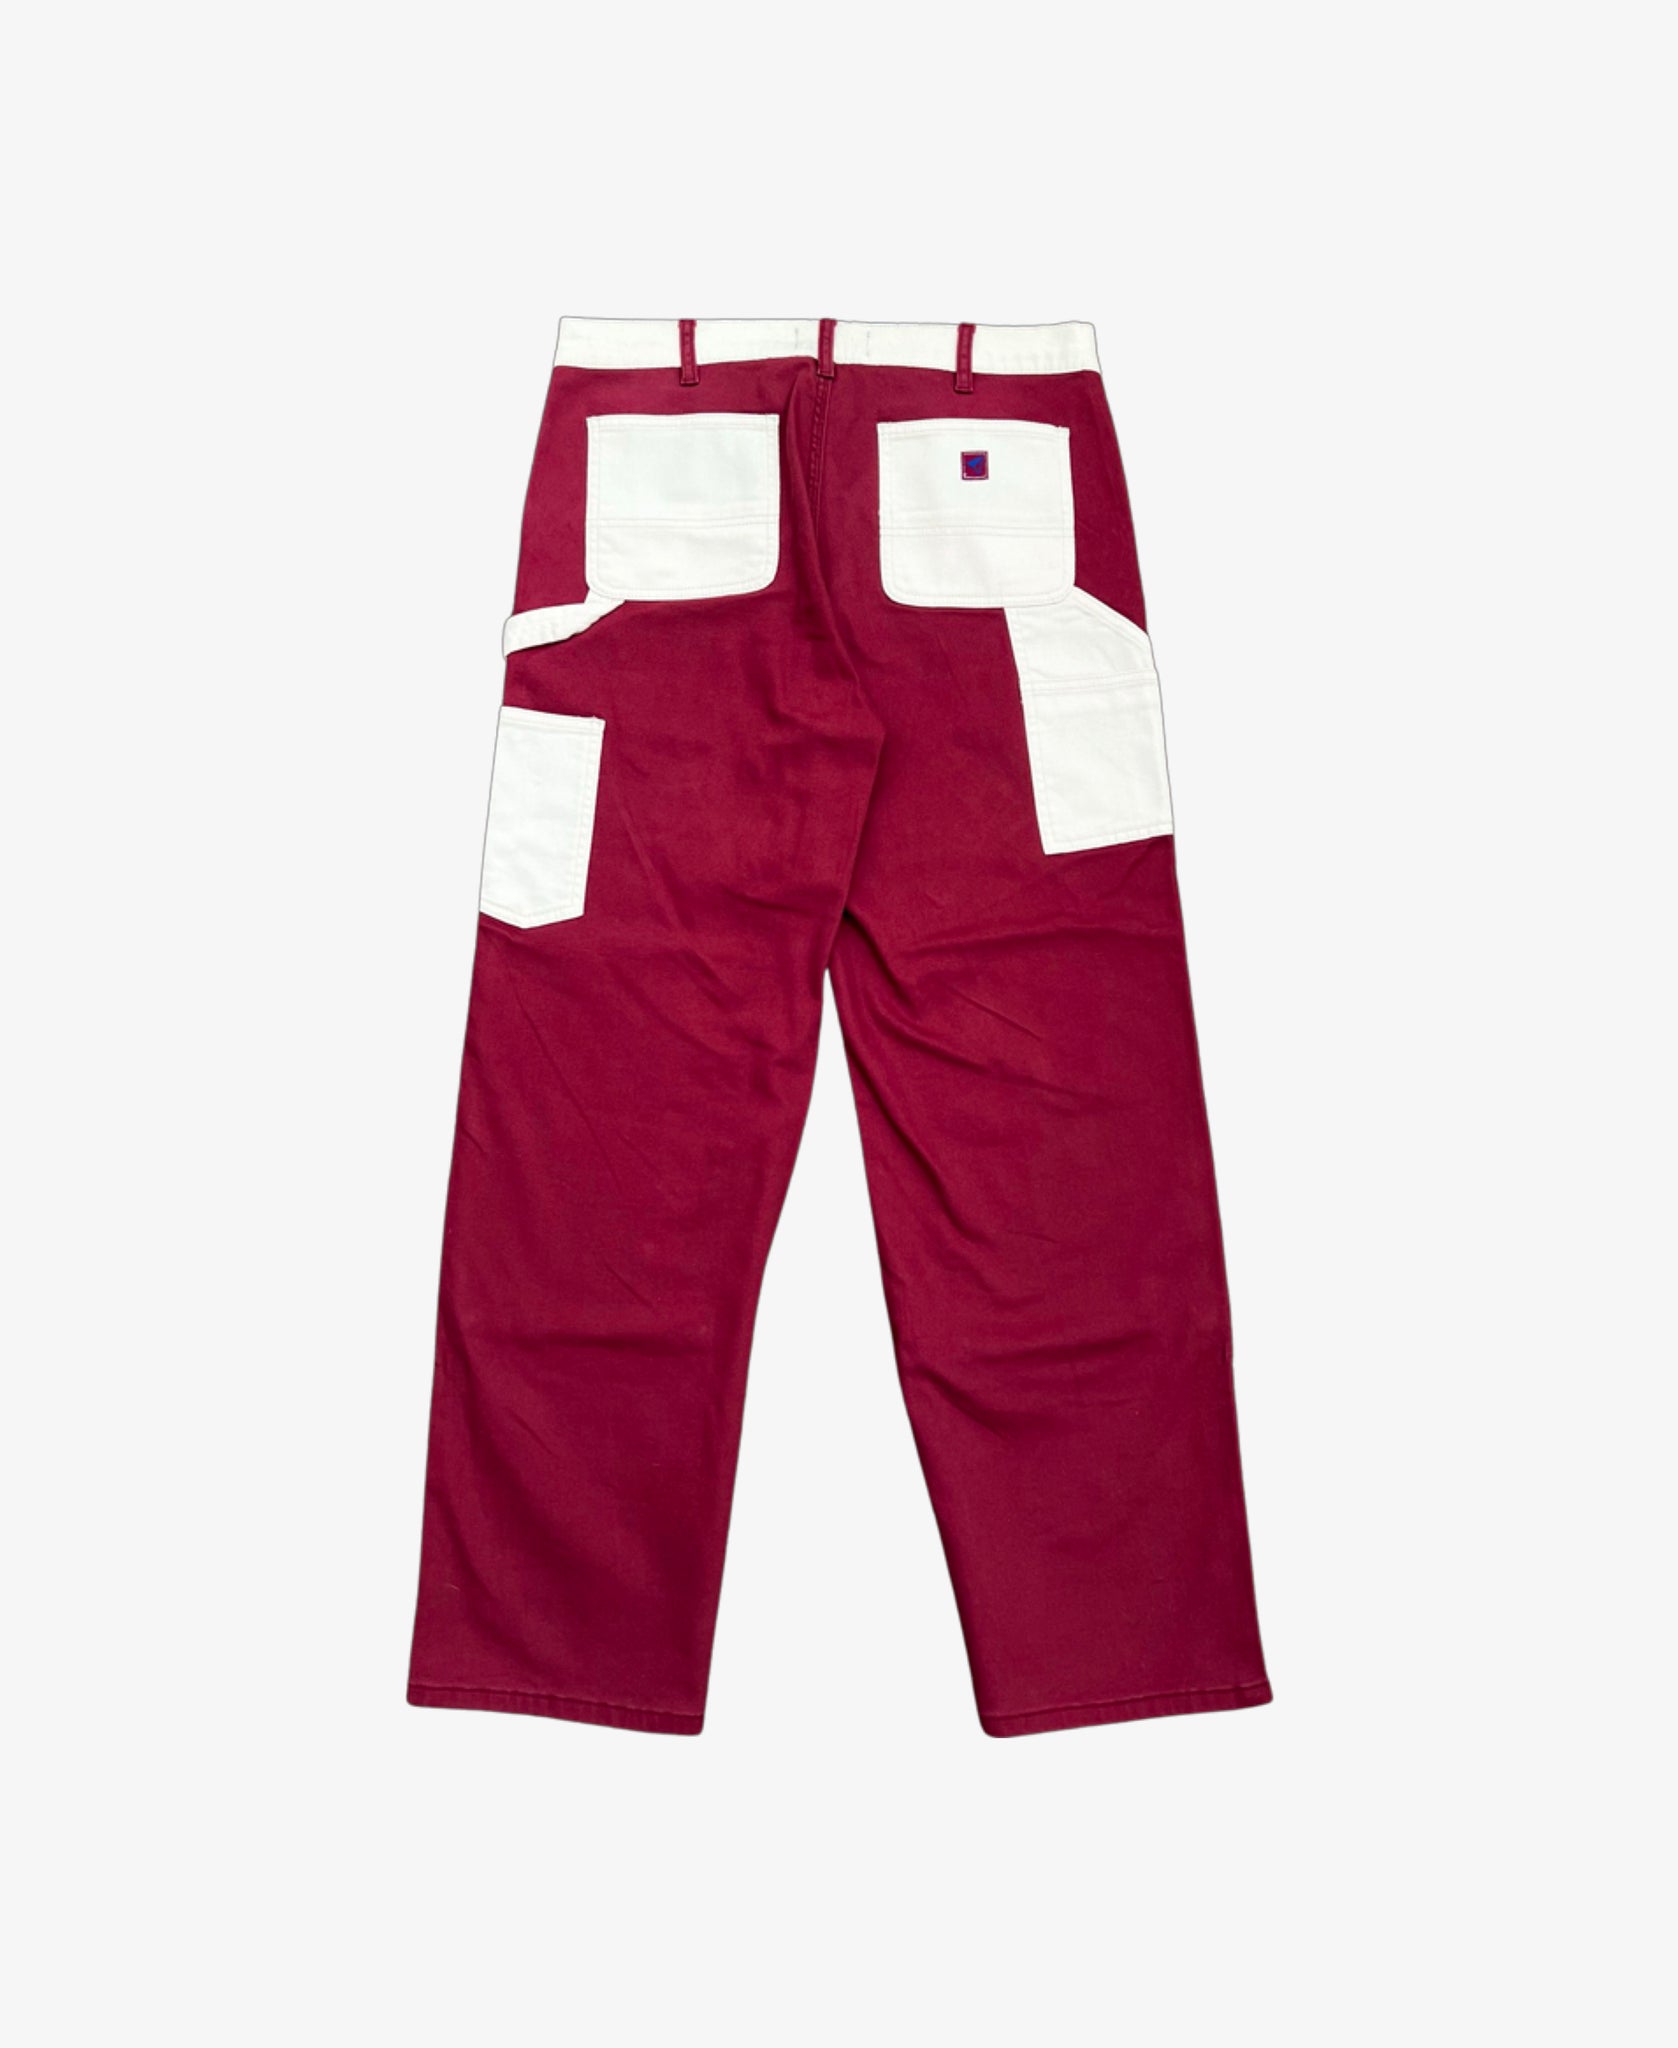 Two-Tone Carpenter Pants - Red